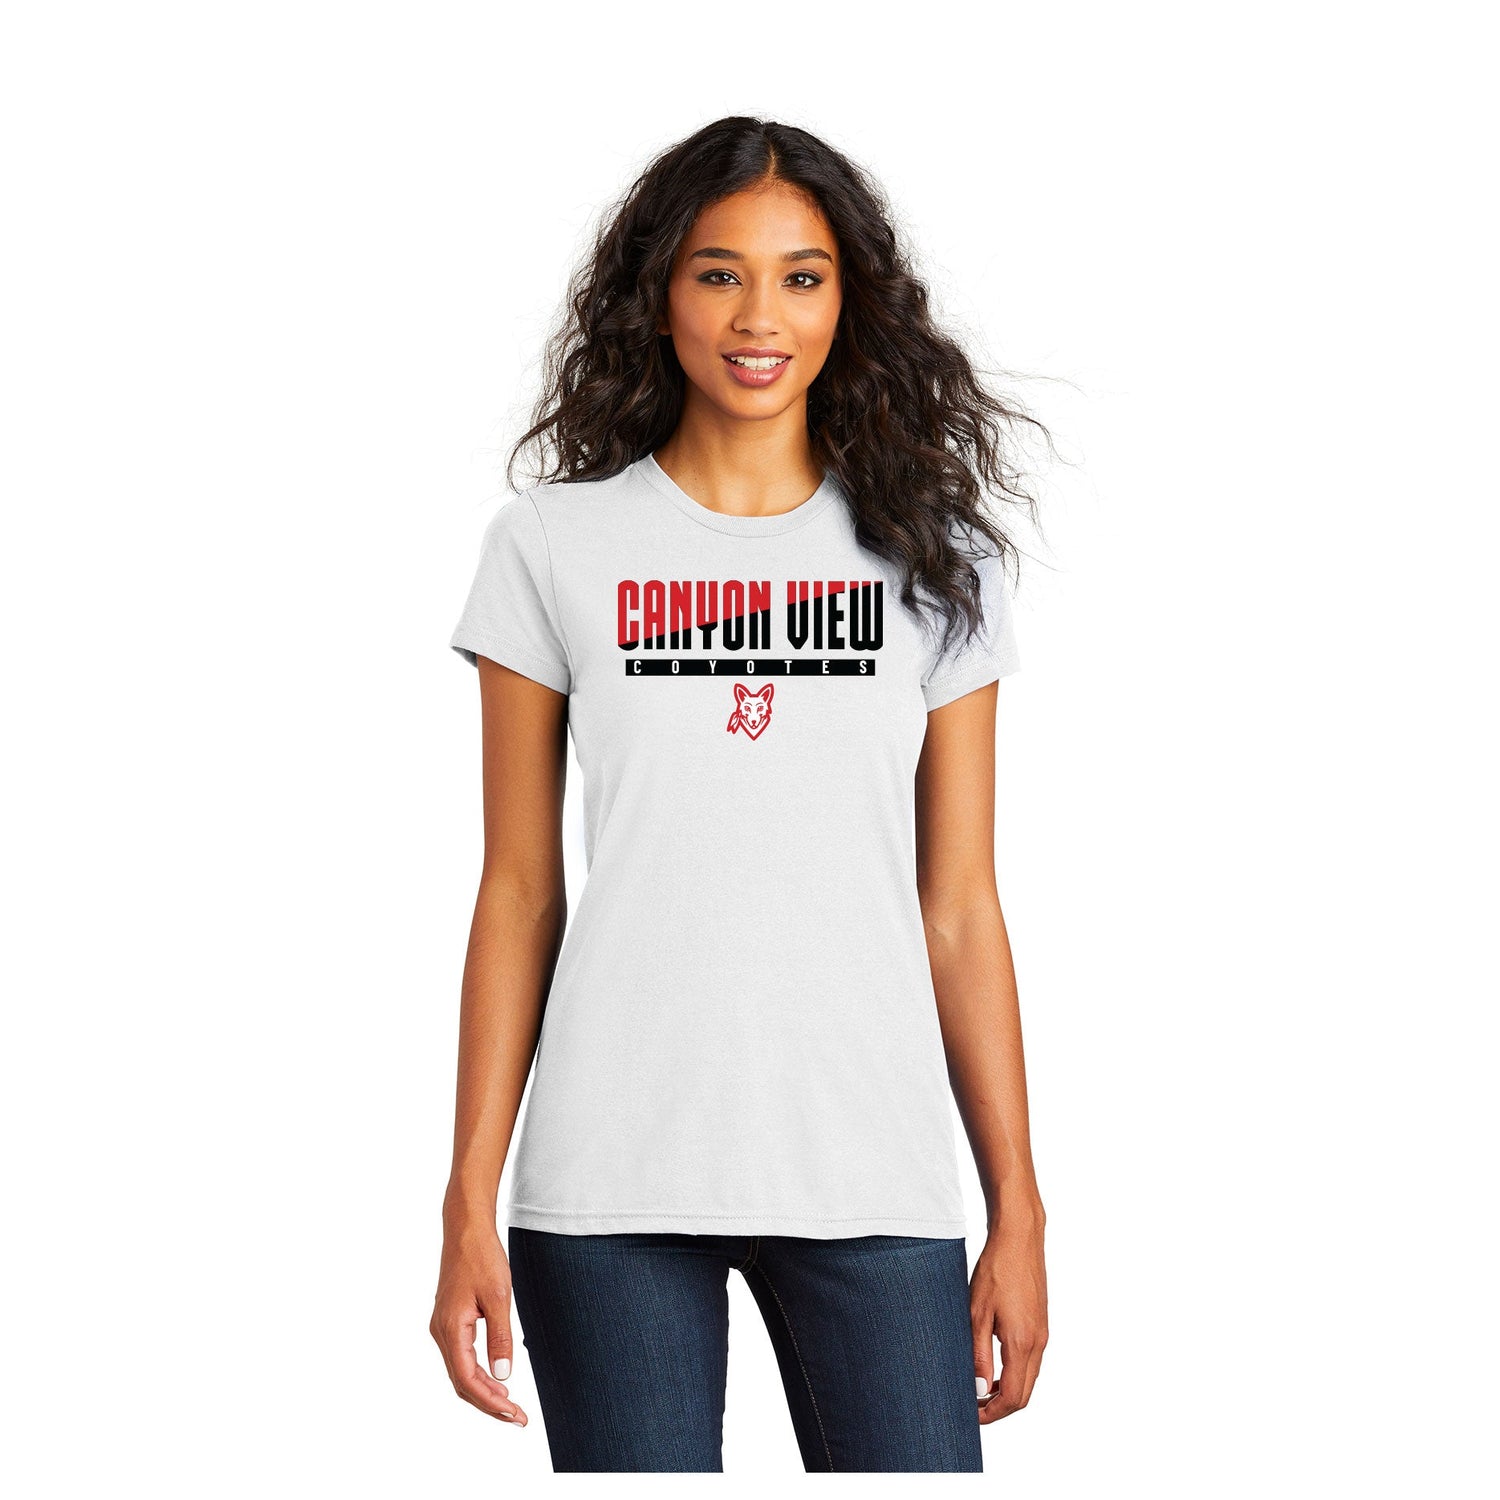 CANYON VIEW STACKED DESIGN WOMEN'S SHORT SLEEVE TEE